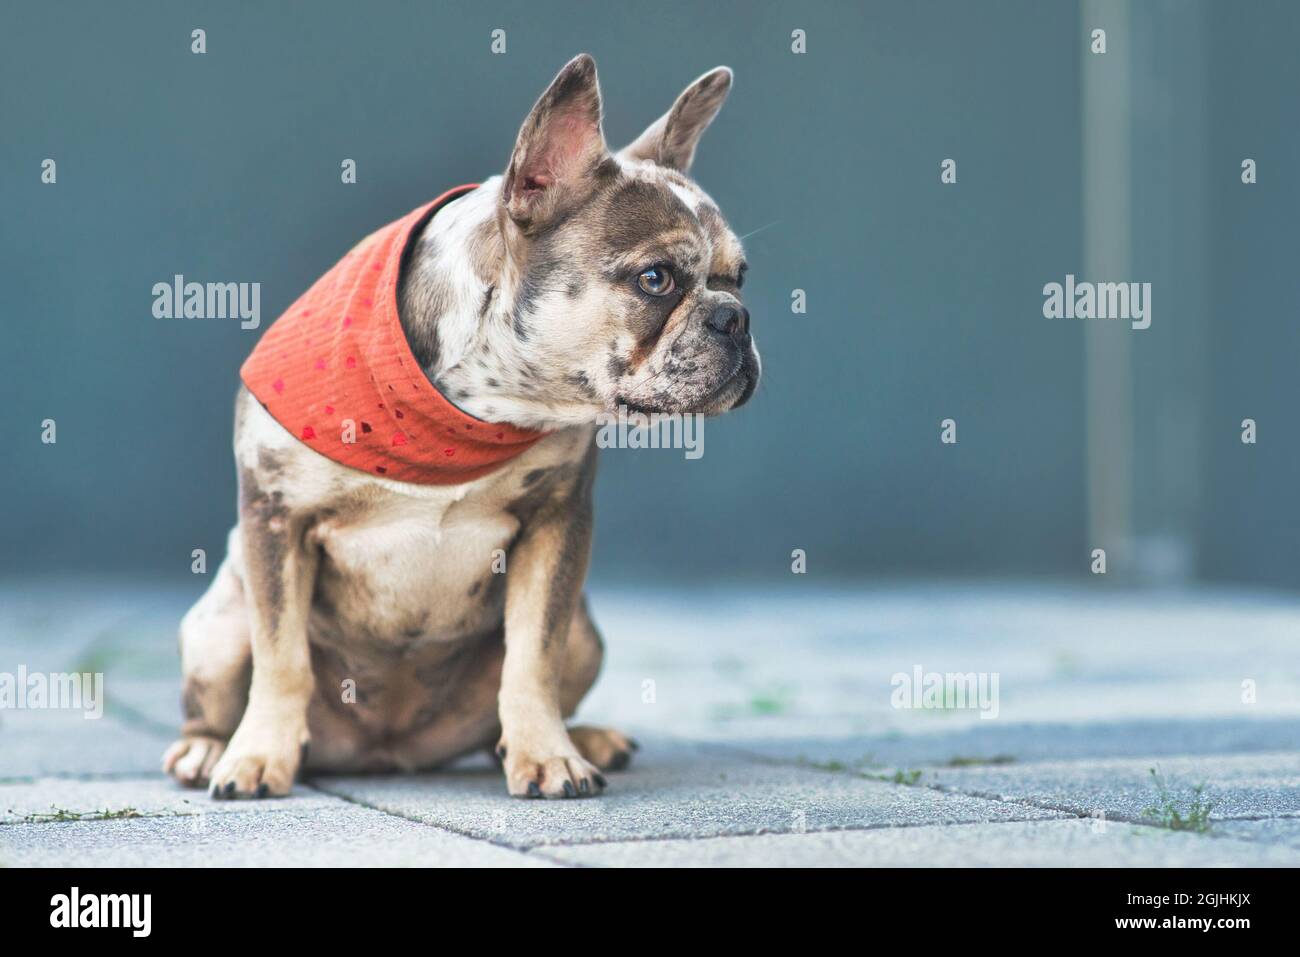 Merle colored French Bulldog dog wearing red neckerchief sitting in front of gray wall with copy space Stock Photo